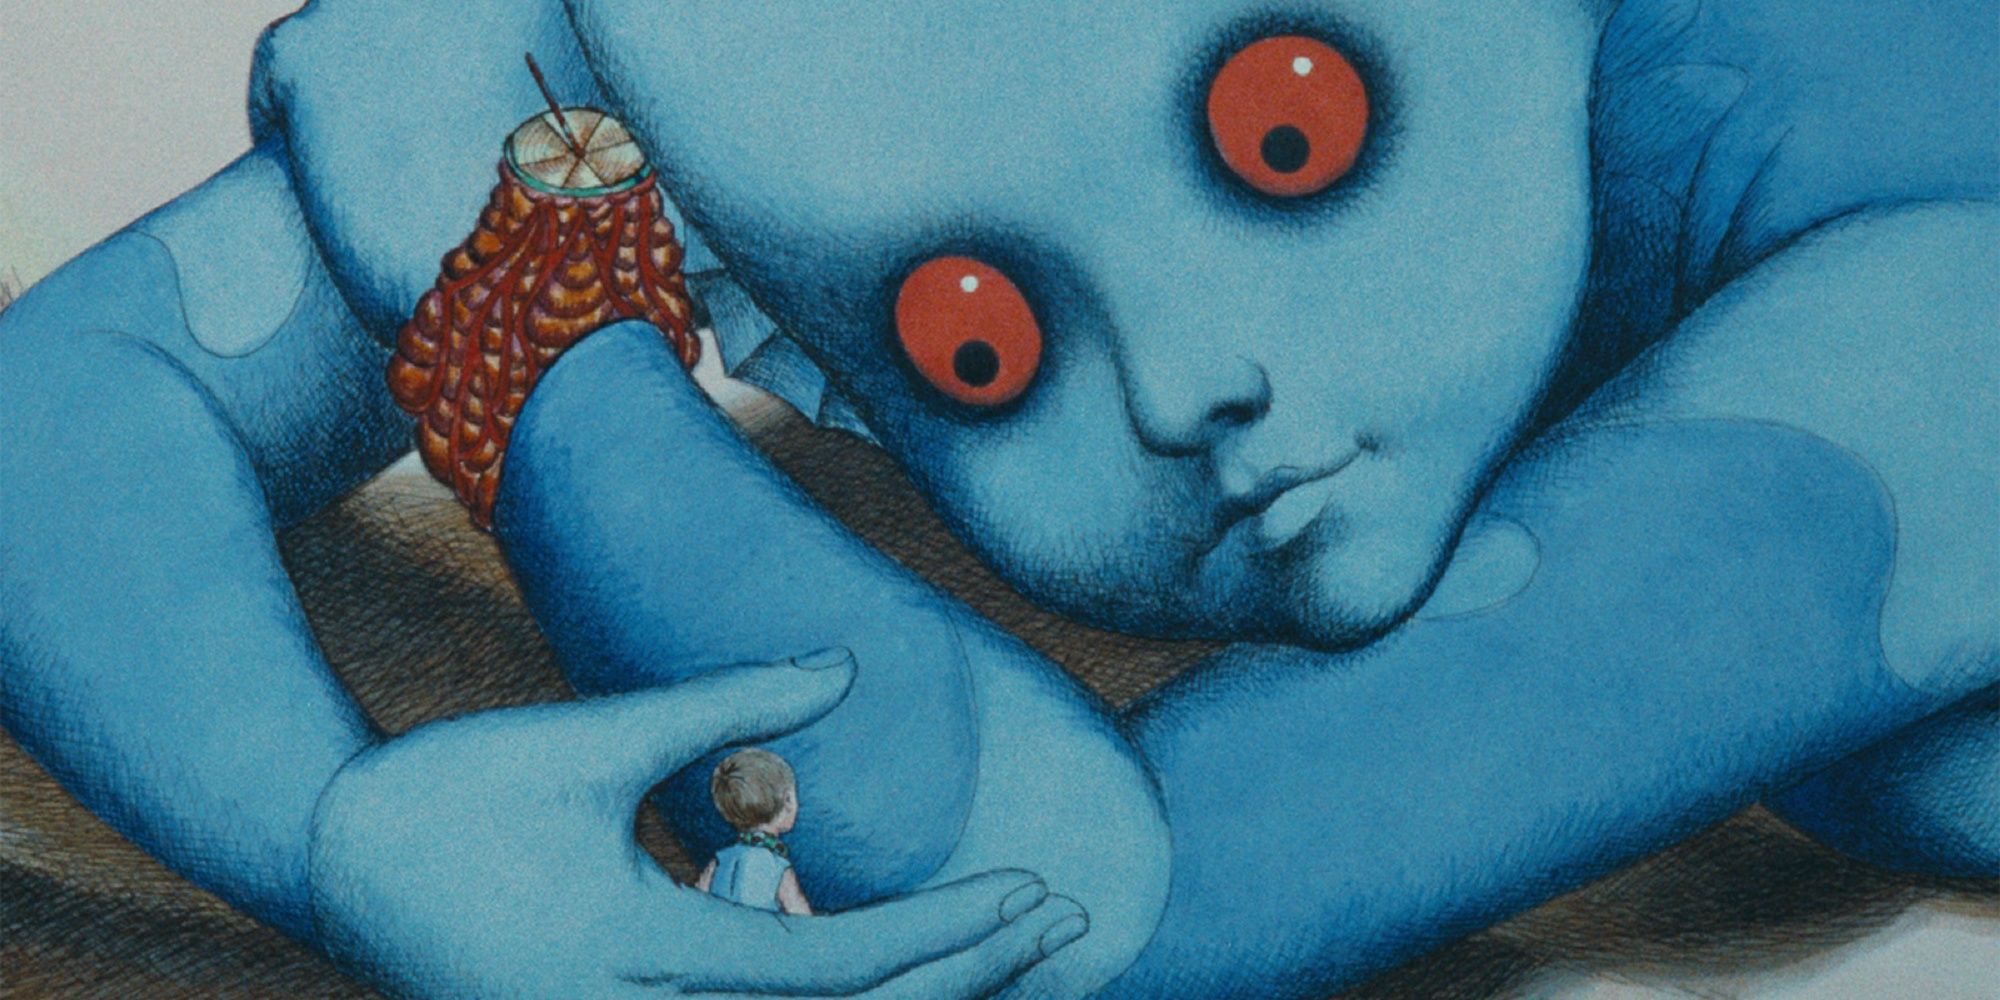 The Draag and Om together in Fantastic Planet.